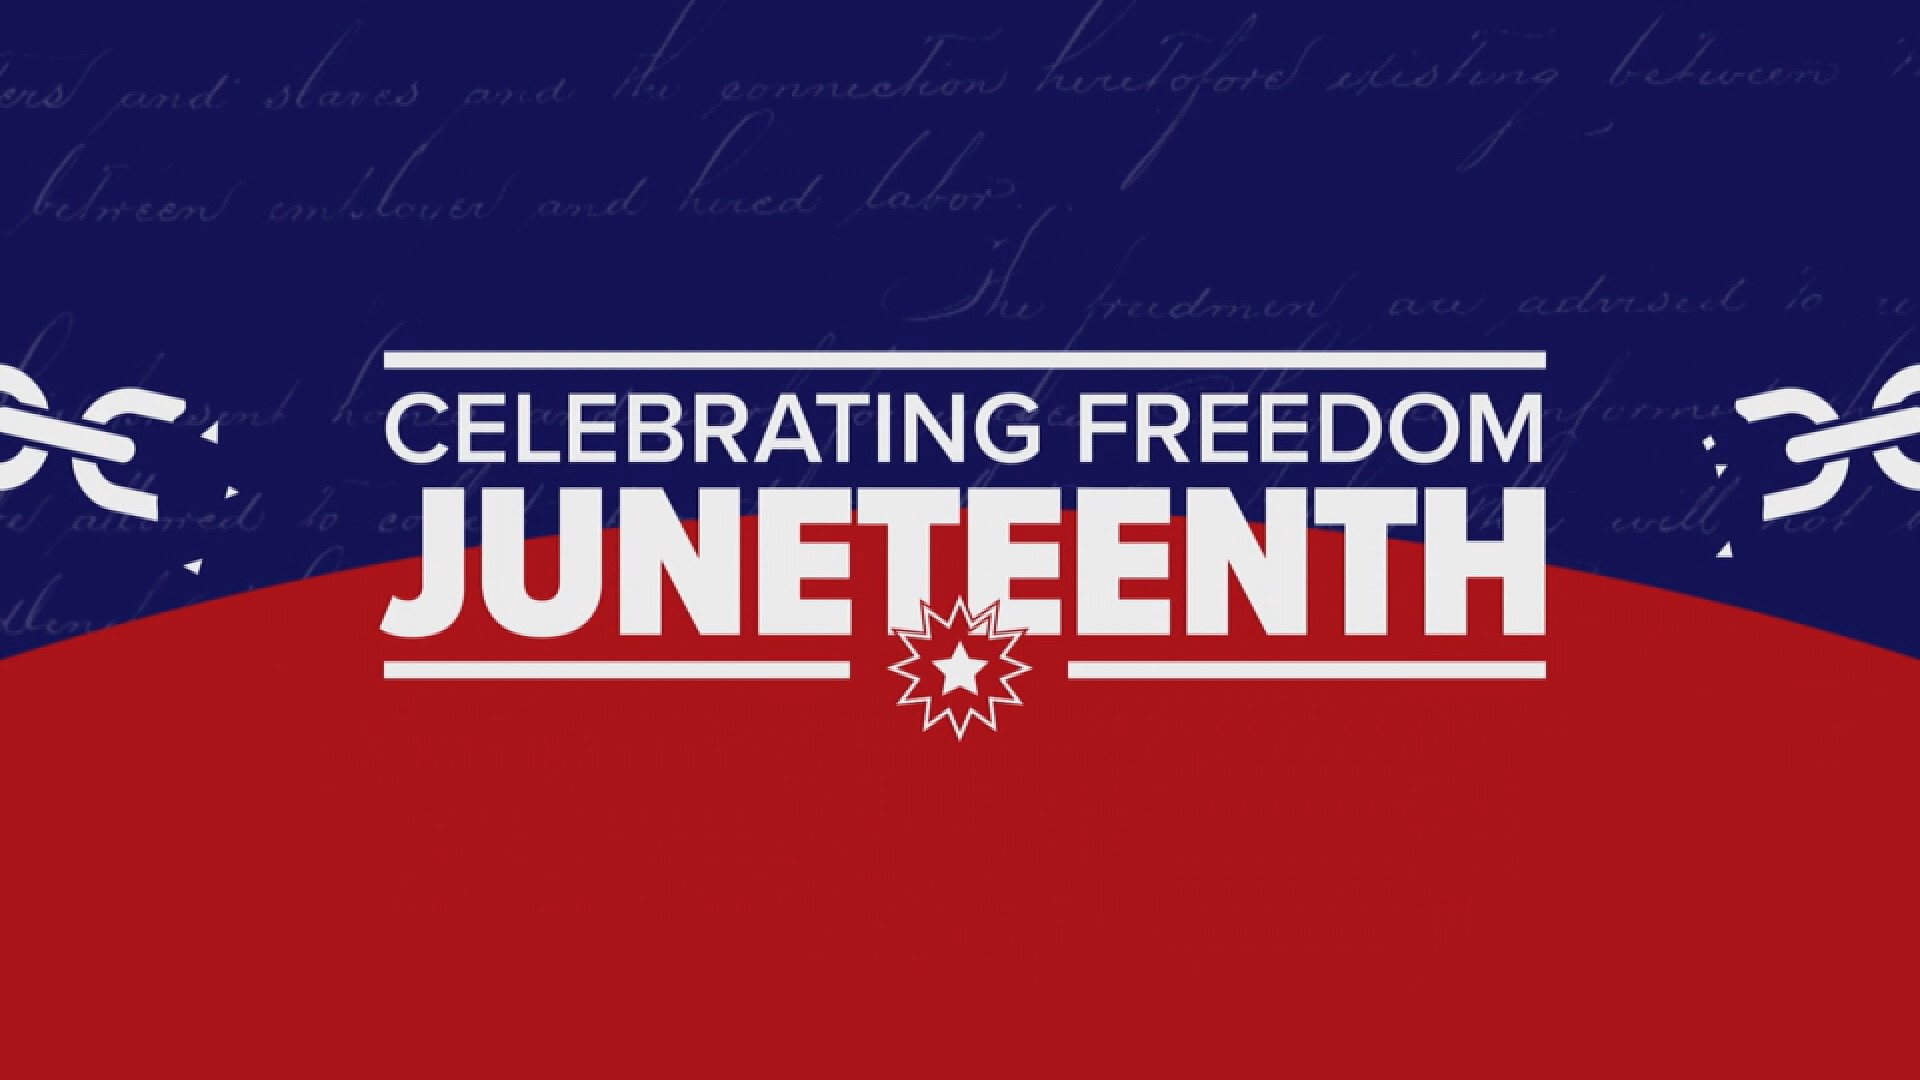 Many events are happening around Central Georgia to commemorate 156 years of Juneteenth celebrations.